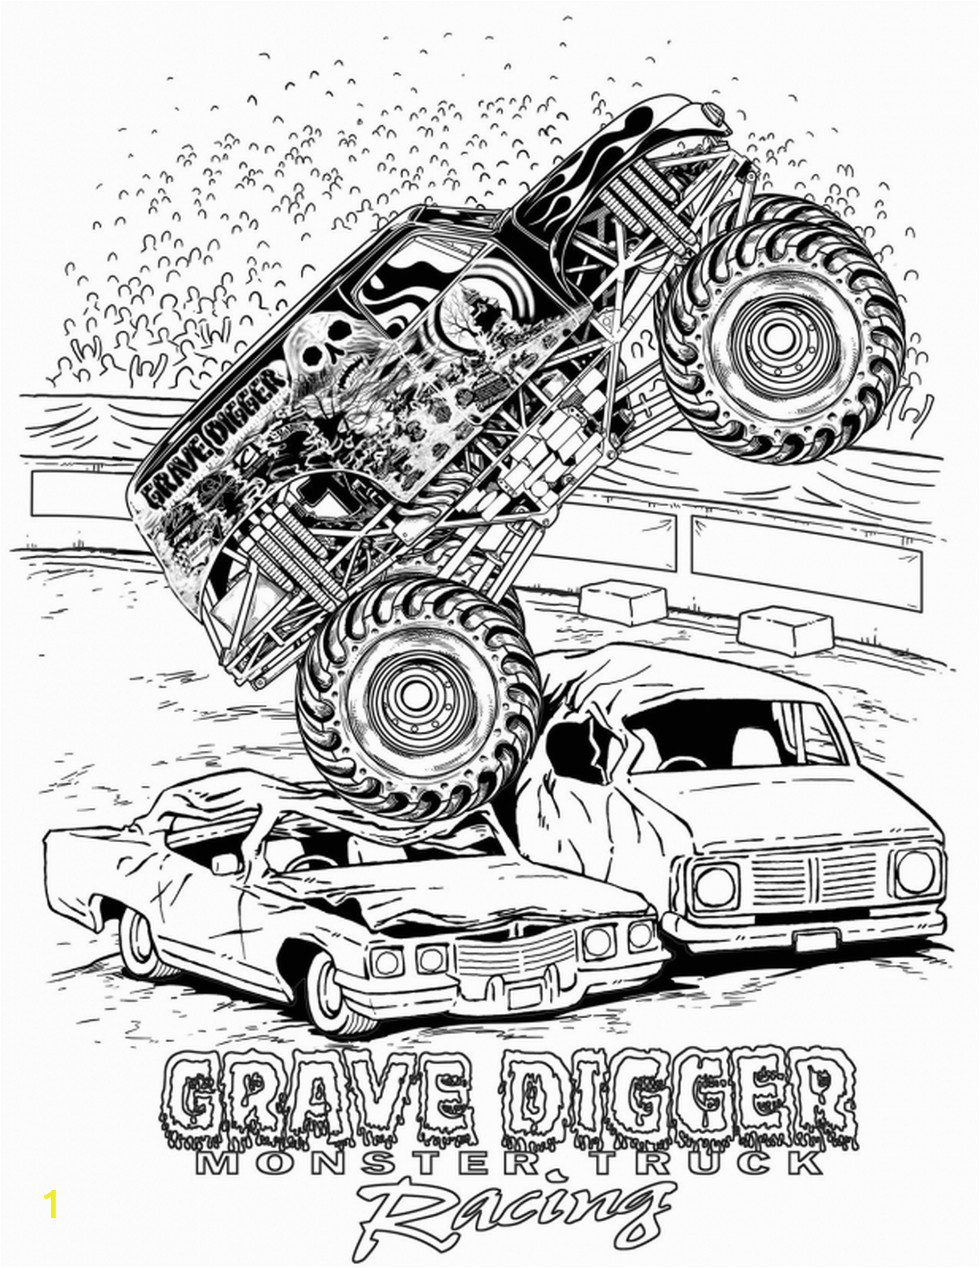 Grave Digger Monster Truck Coloring Pages Get This Grave Digger Monster Truck Coloring Pages